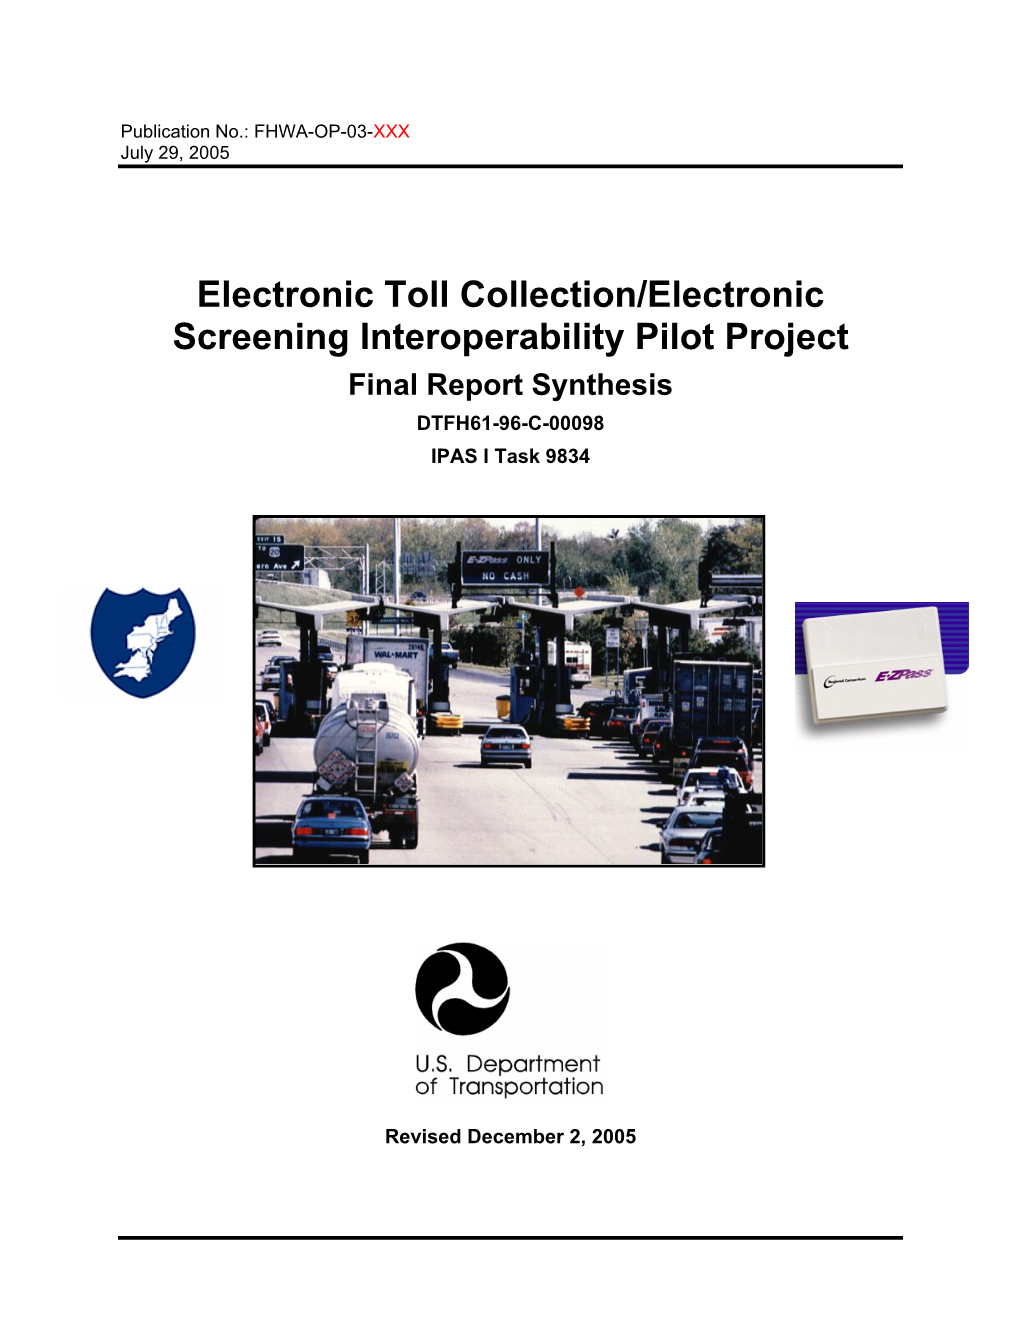 Electronic Toll Collection/Electronic Screening Interoperability Pilot Project Final Report Synthesis DTFH61-96-C-00098 IPAS I Task 9834